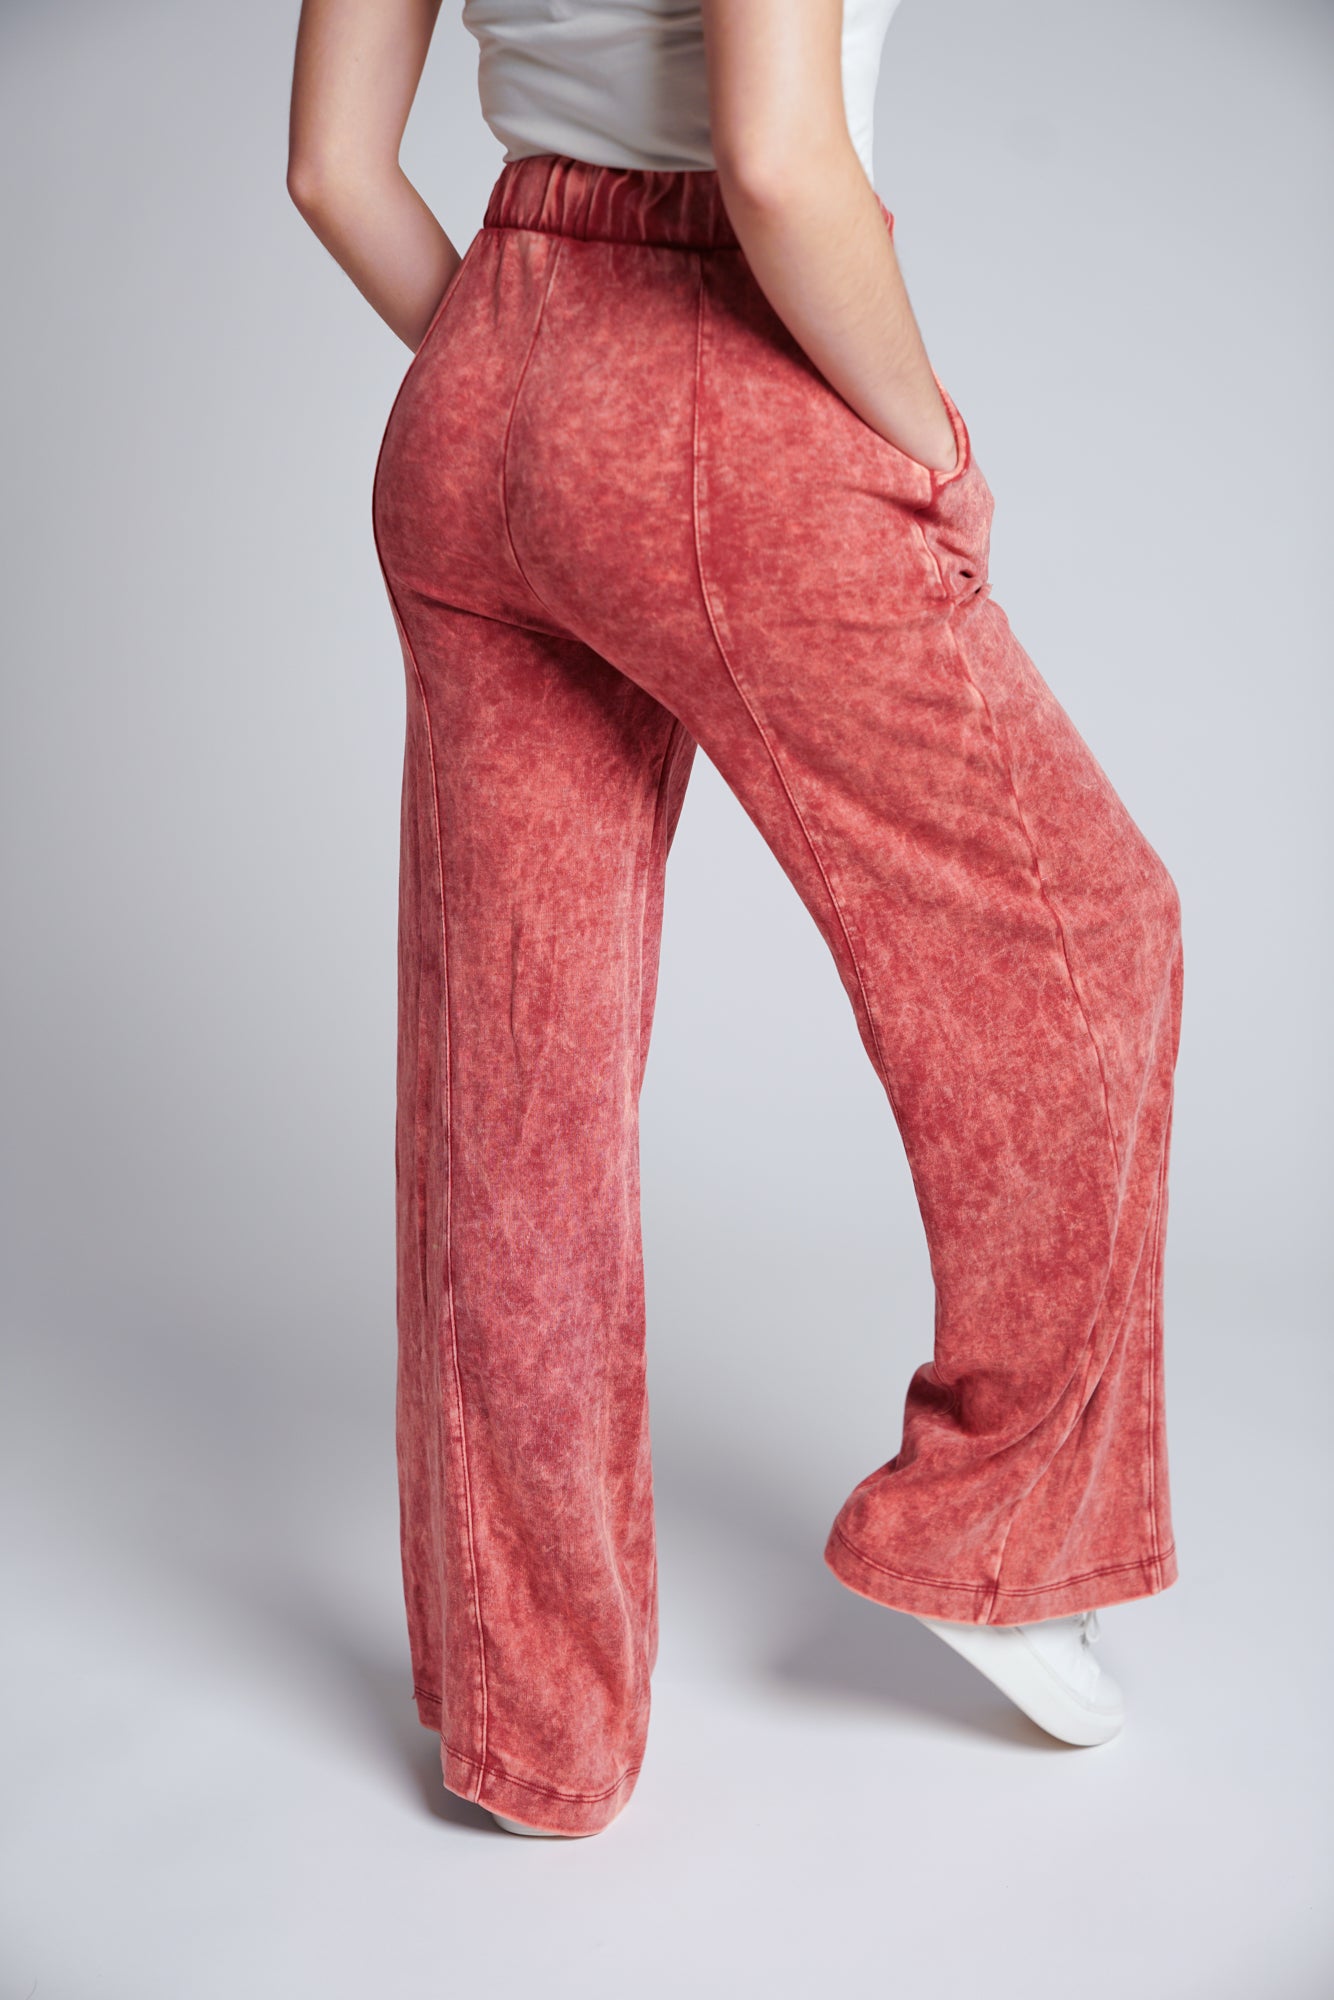 Relaxed Wide Leg Pant